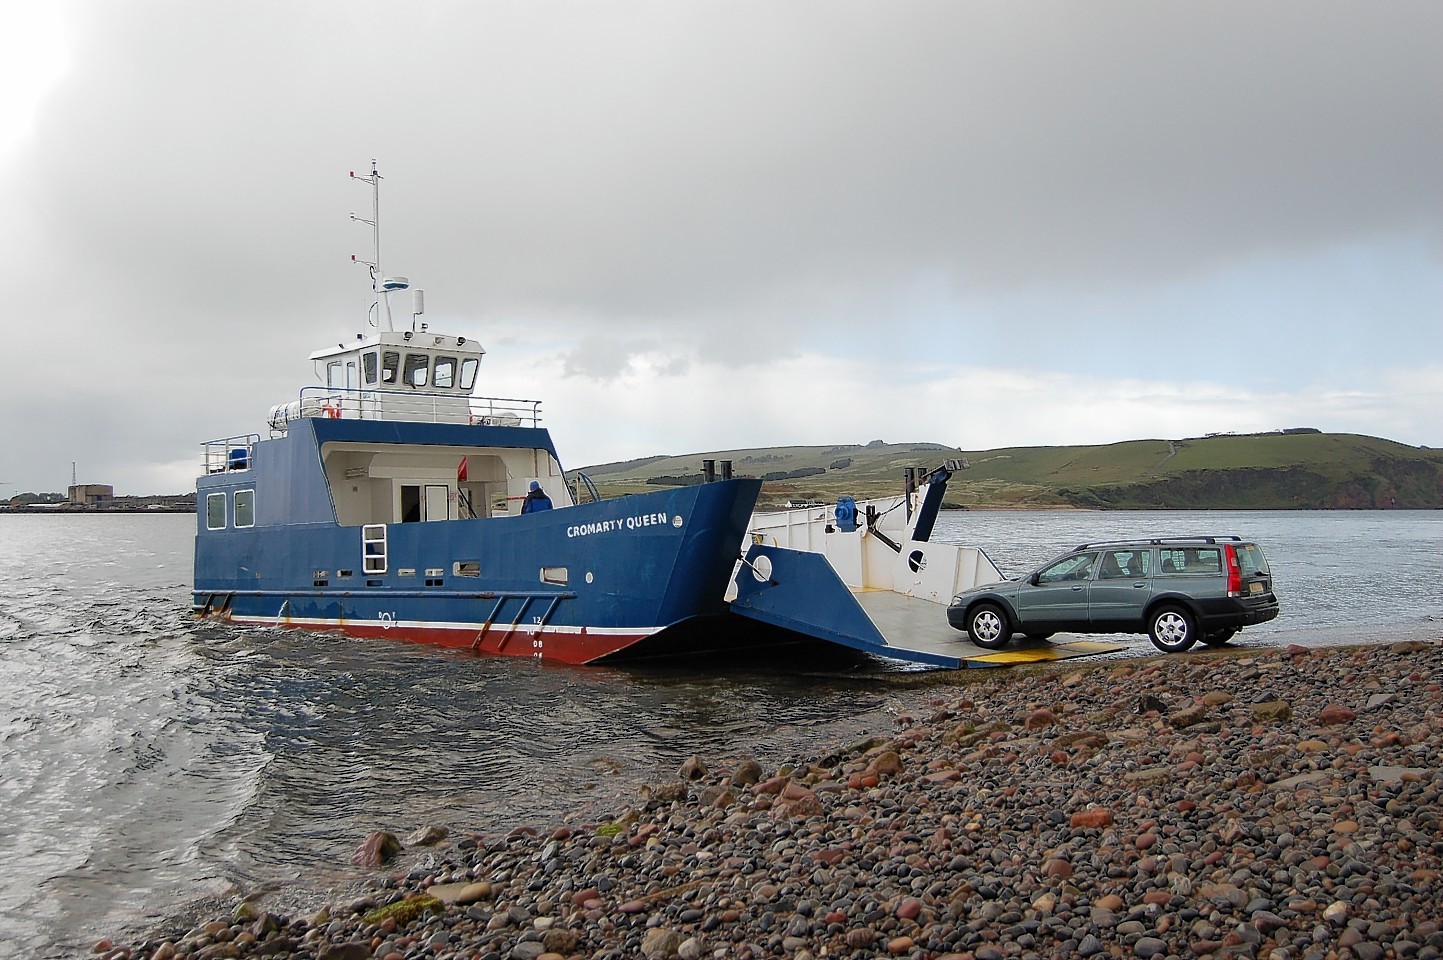 The Cromarty to Nigg ferry